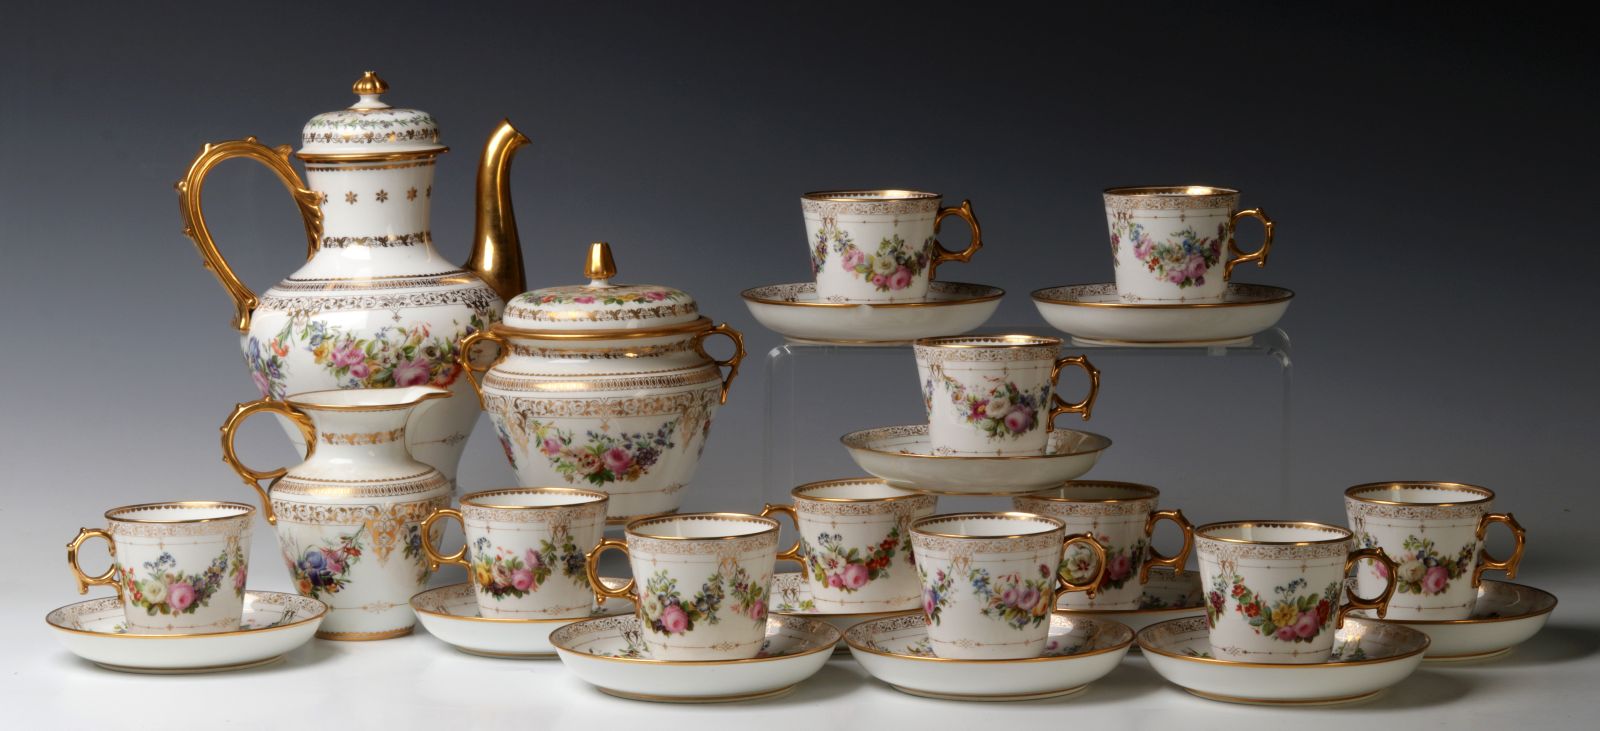 A FINE 19TH C. SEVRES FRENCH PORCELAIN COFFEE SET